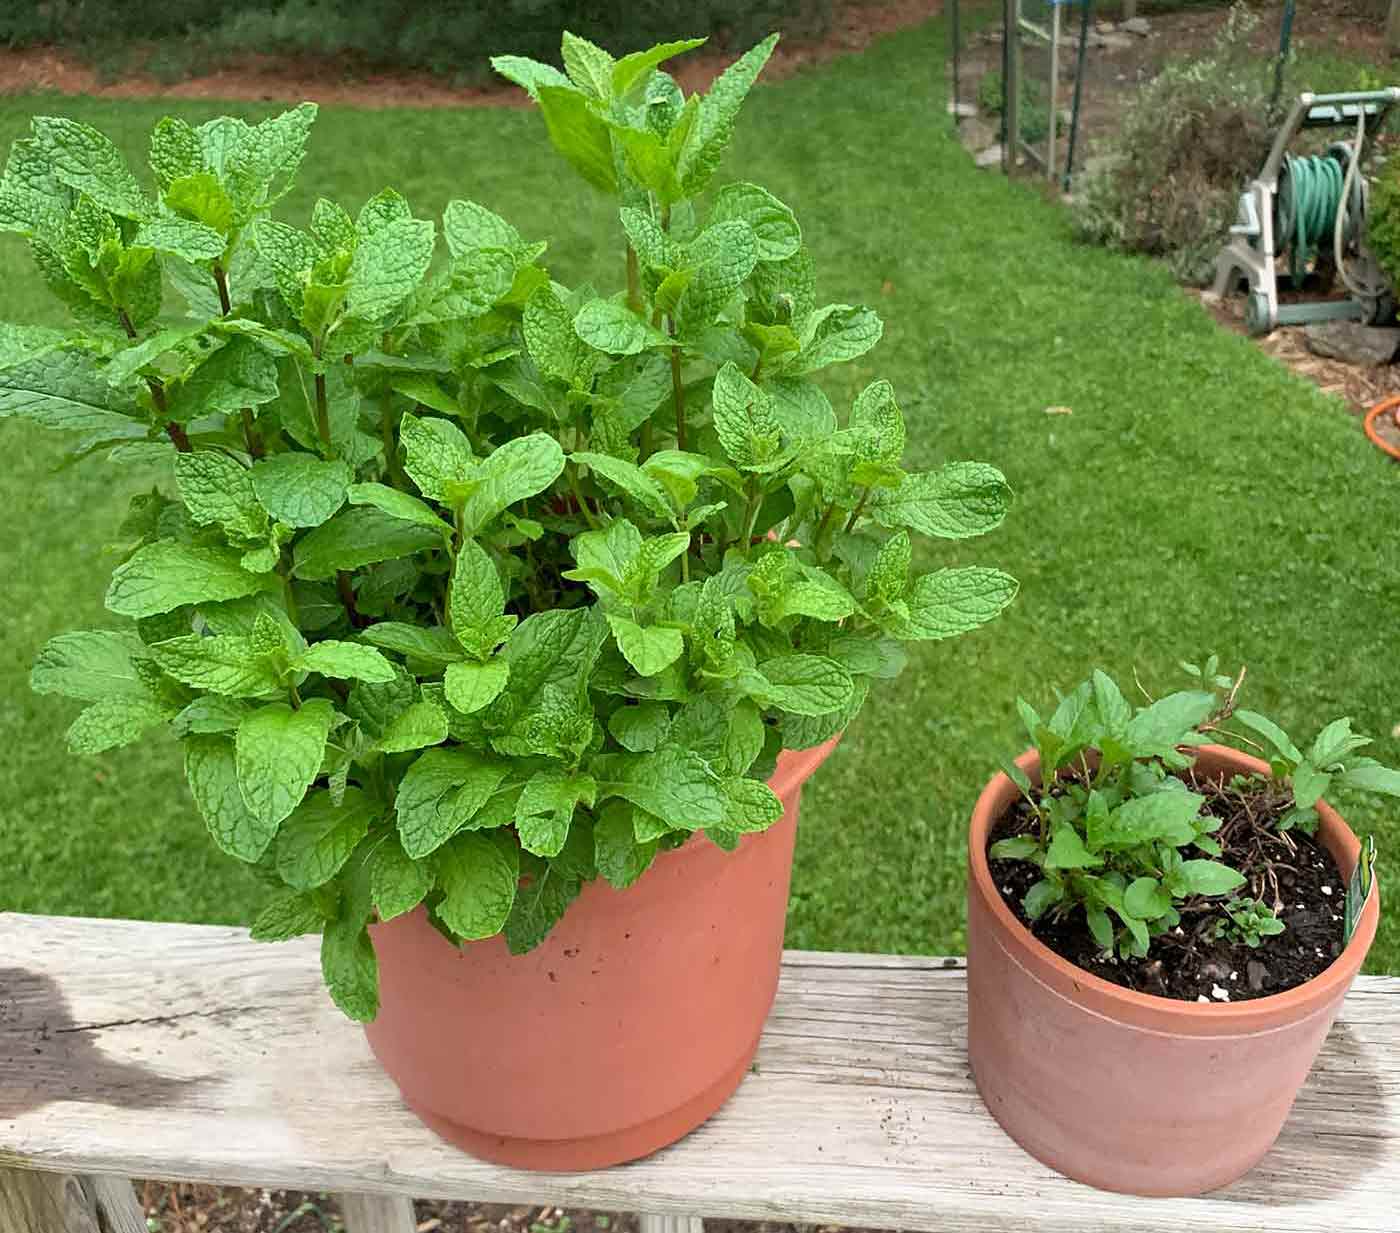 Spearmint and peppermint plants in pots growing in early summer.